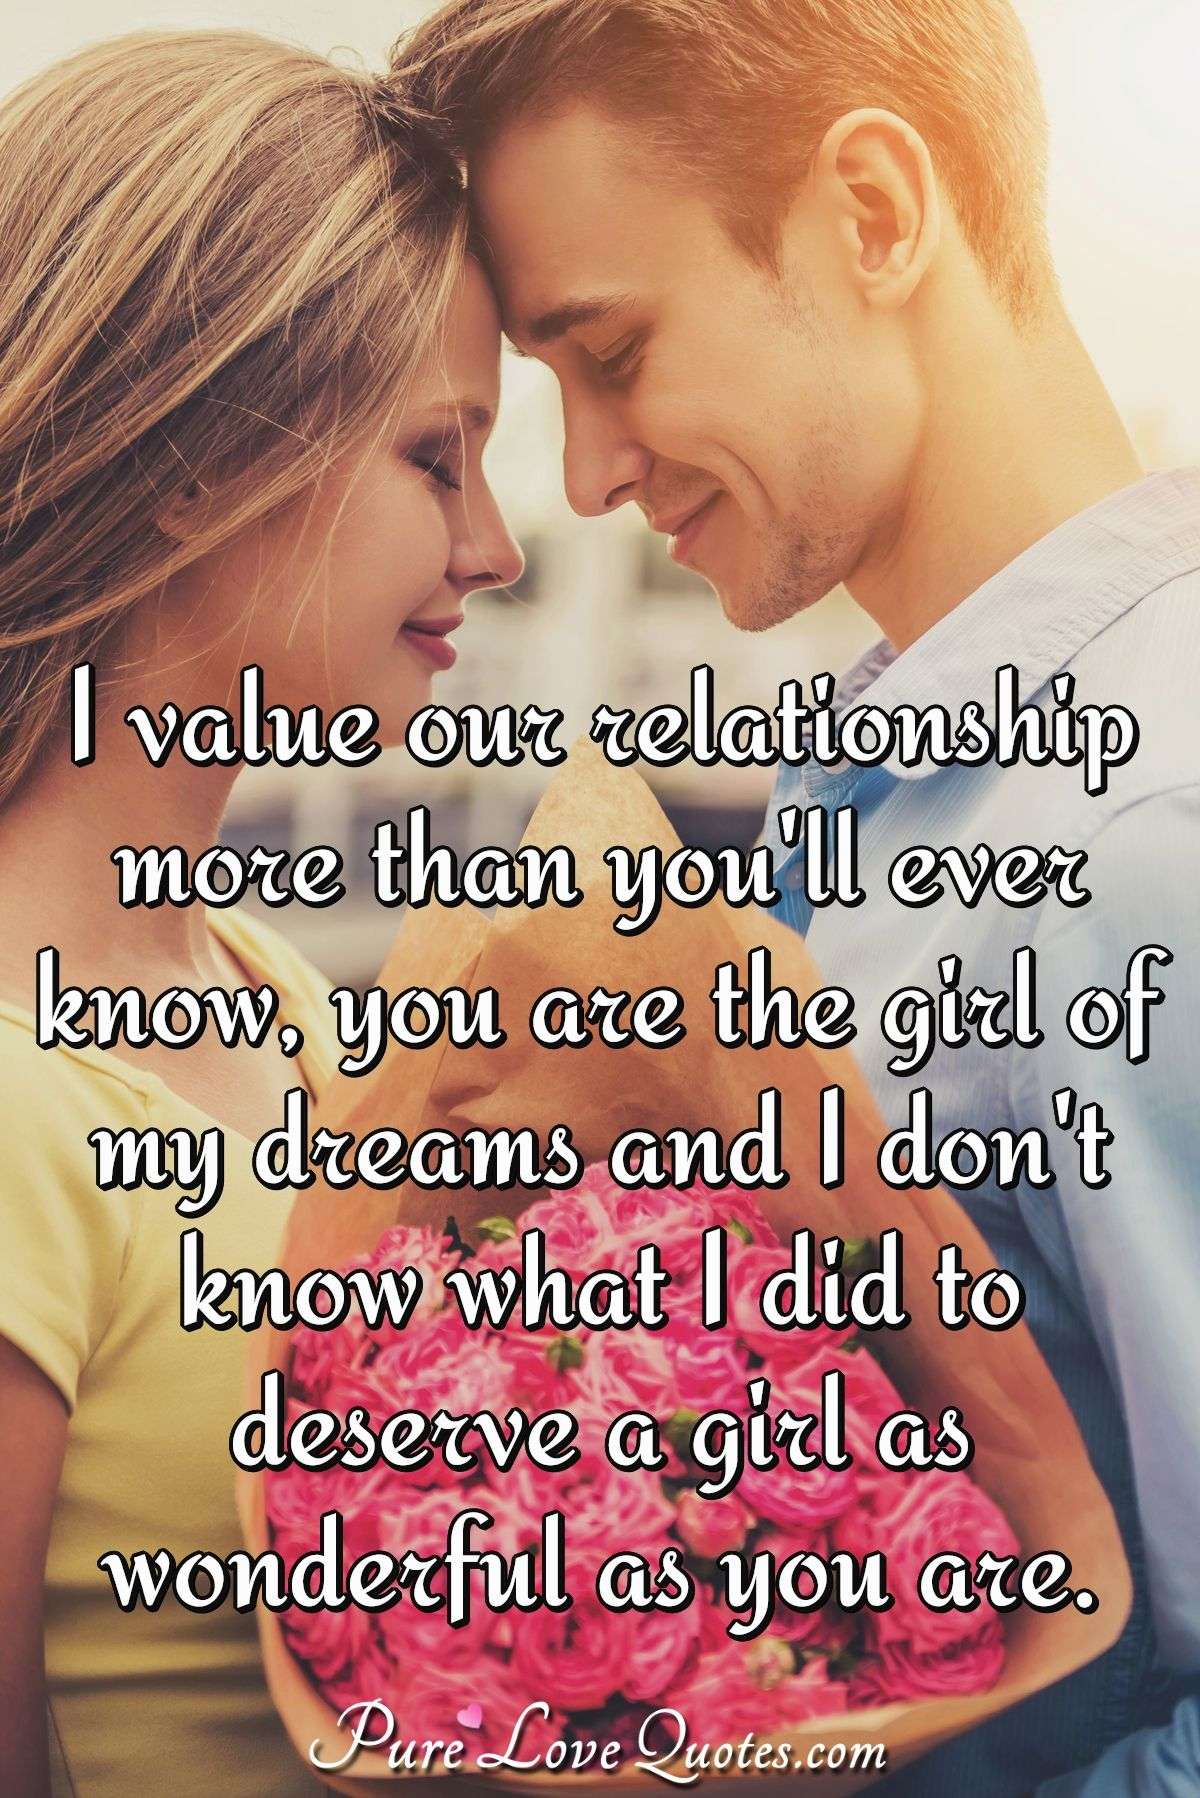 I value our relationship more than you'll ever know, you are the girl of my dreams and I don't know what I did to deserve a girl as wonderful as you are. - PureLoveQuotes.com